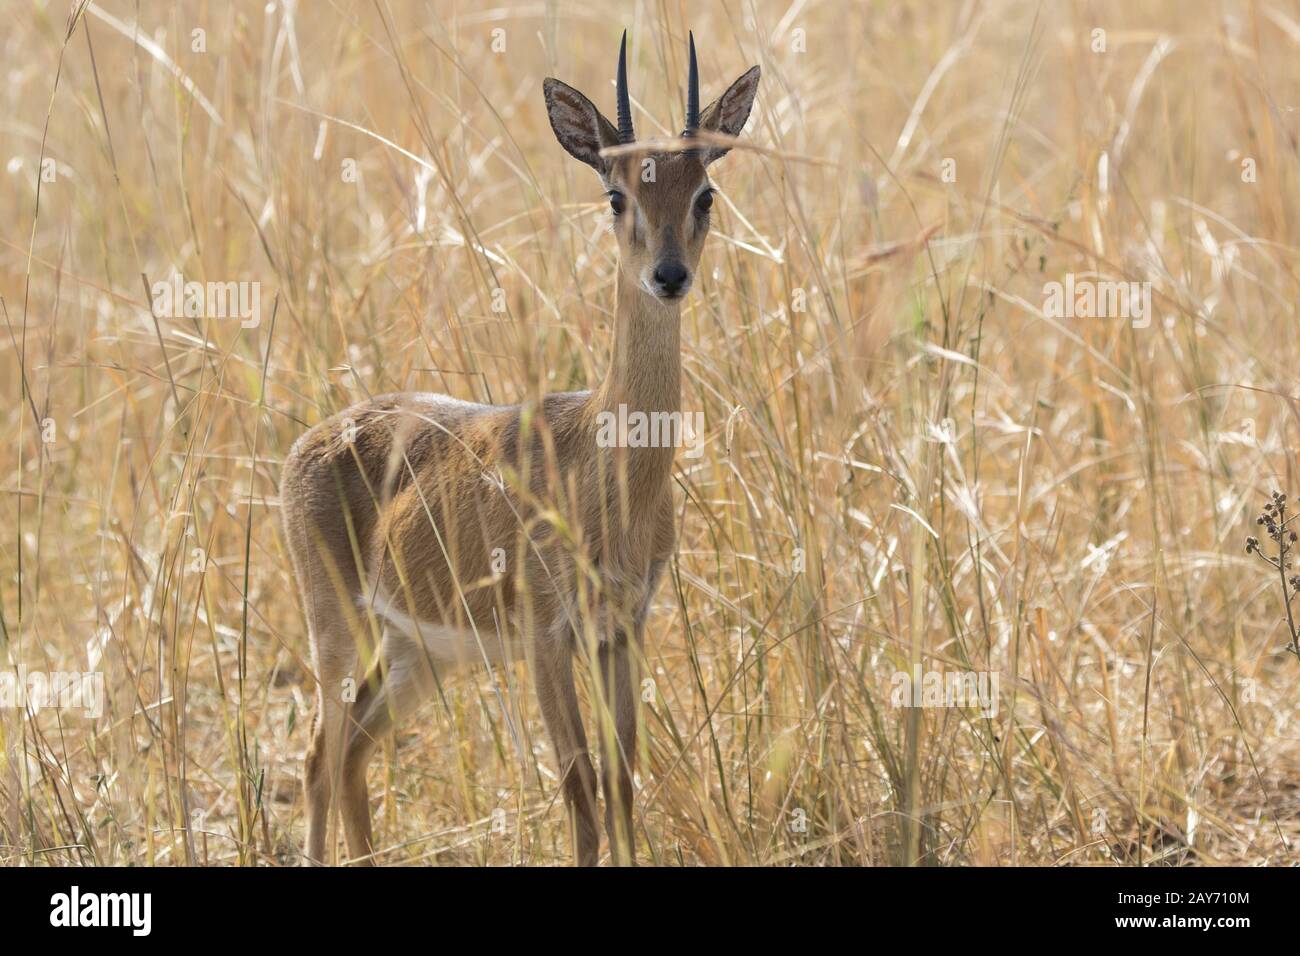 male antelope oribi standing in the middle of dry grass in the savannah Stock Photo